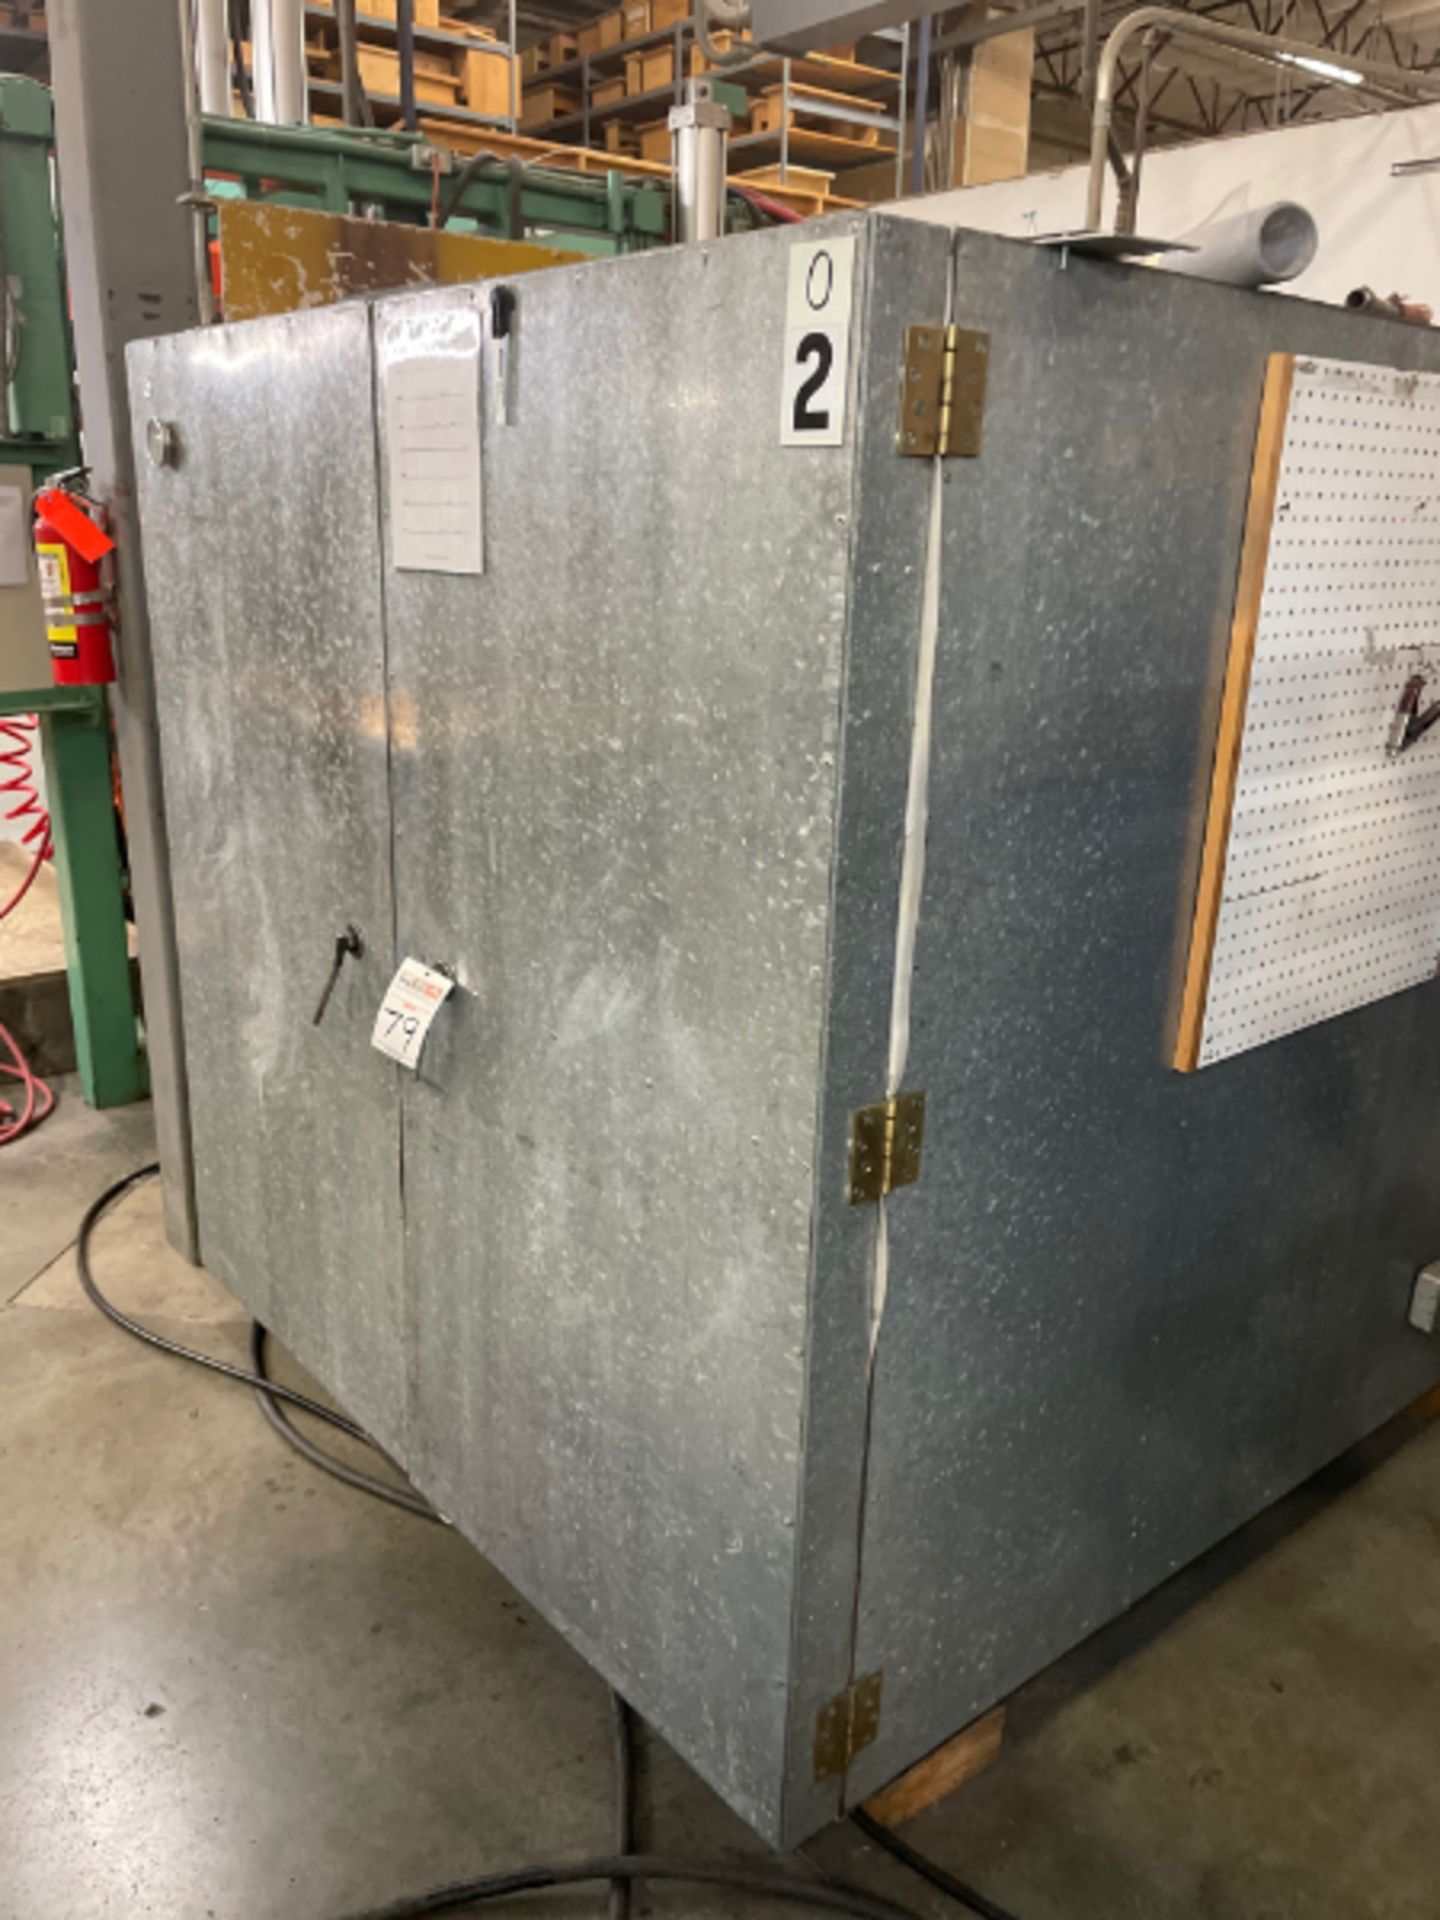 Custom 60" x 60" x 60" Electric Drying Oven - Image 2 of 3